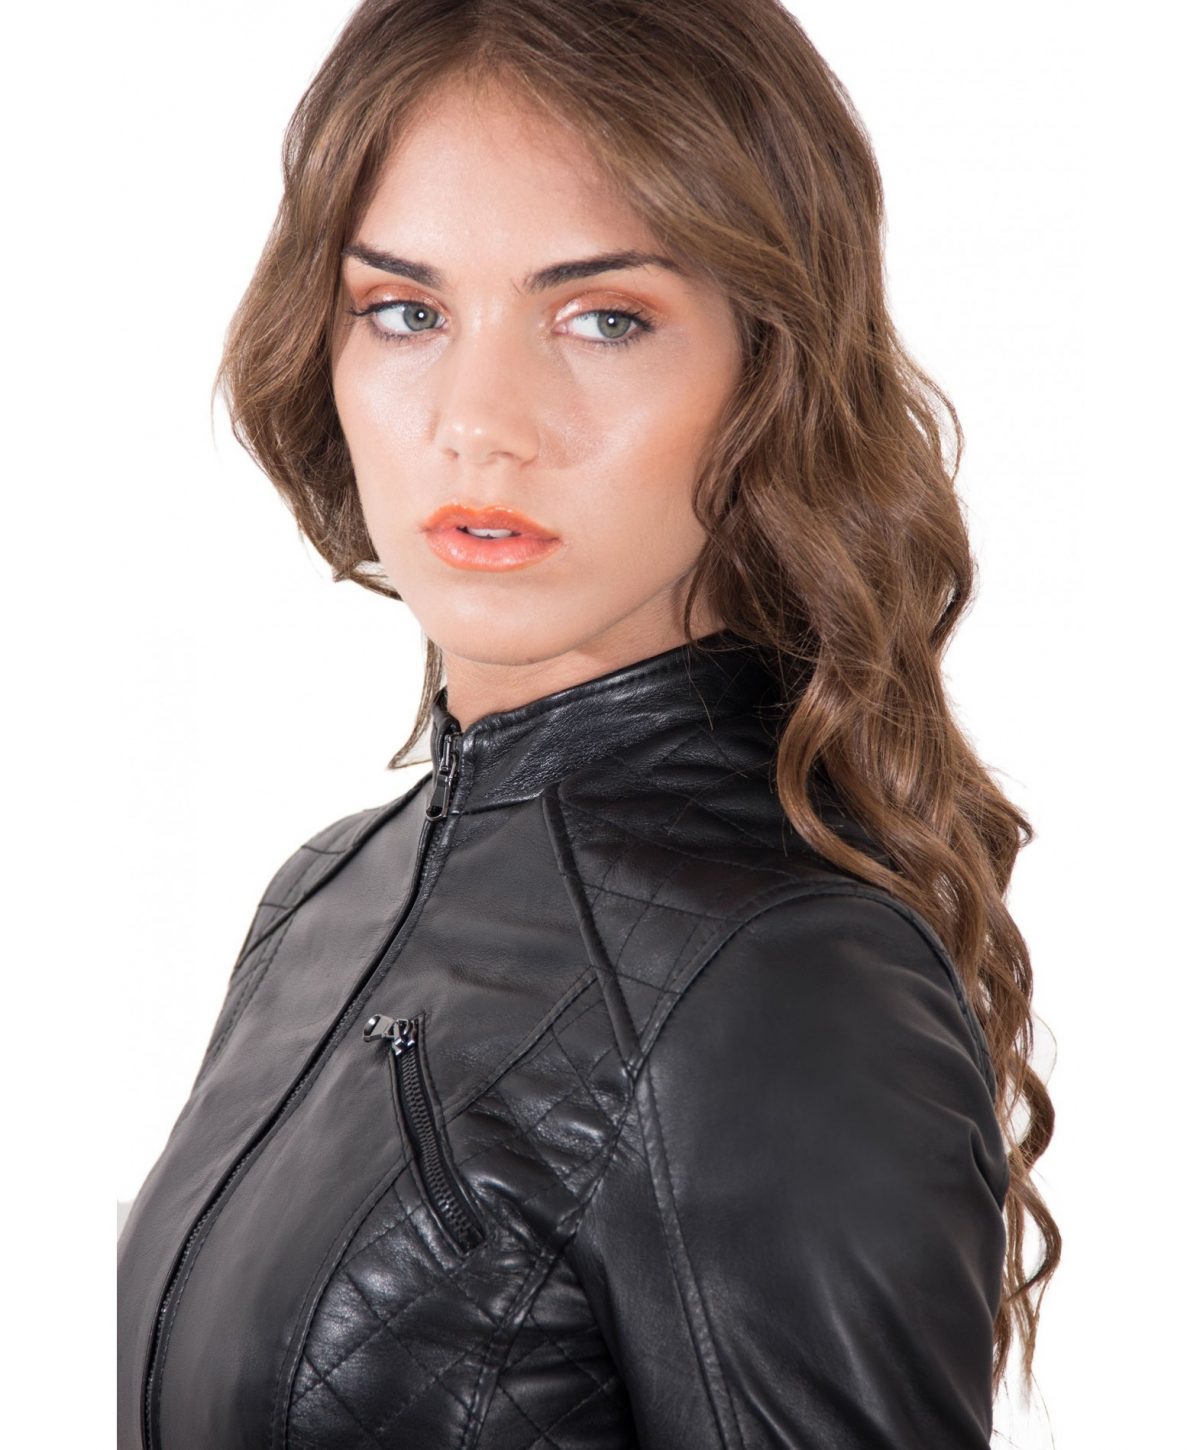 Black Color Lamb Leather Quilted Biker Jacket Smooth Effect